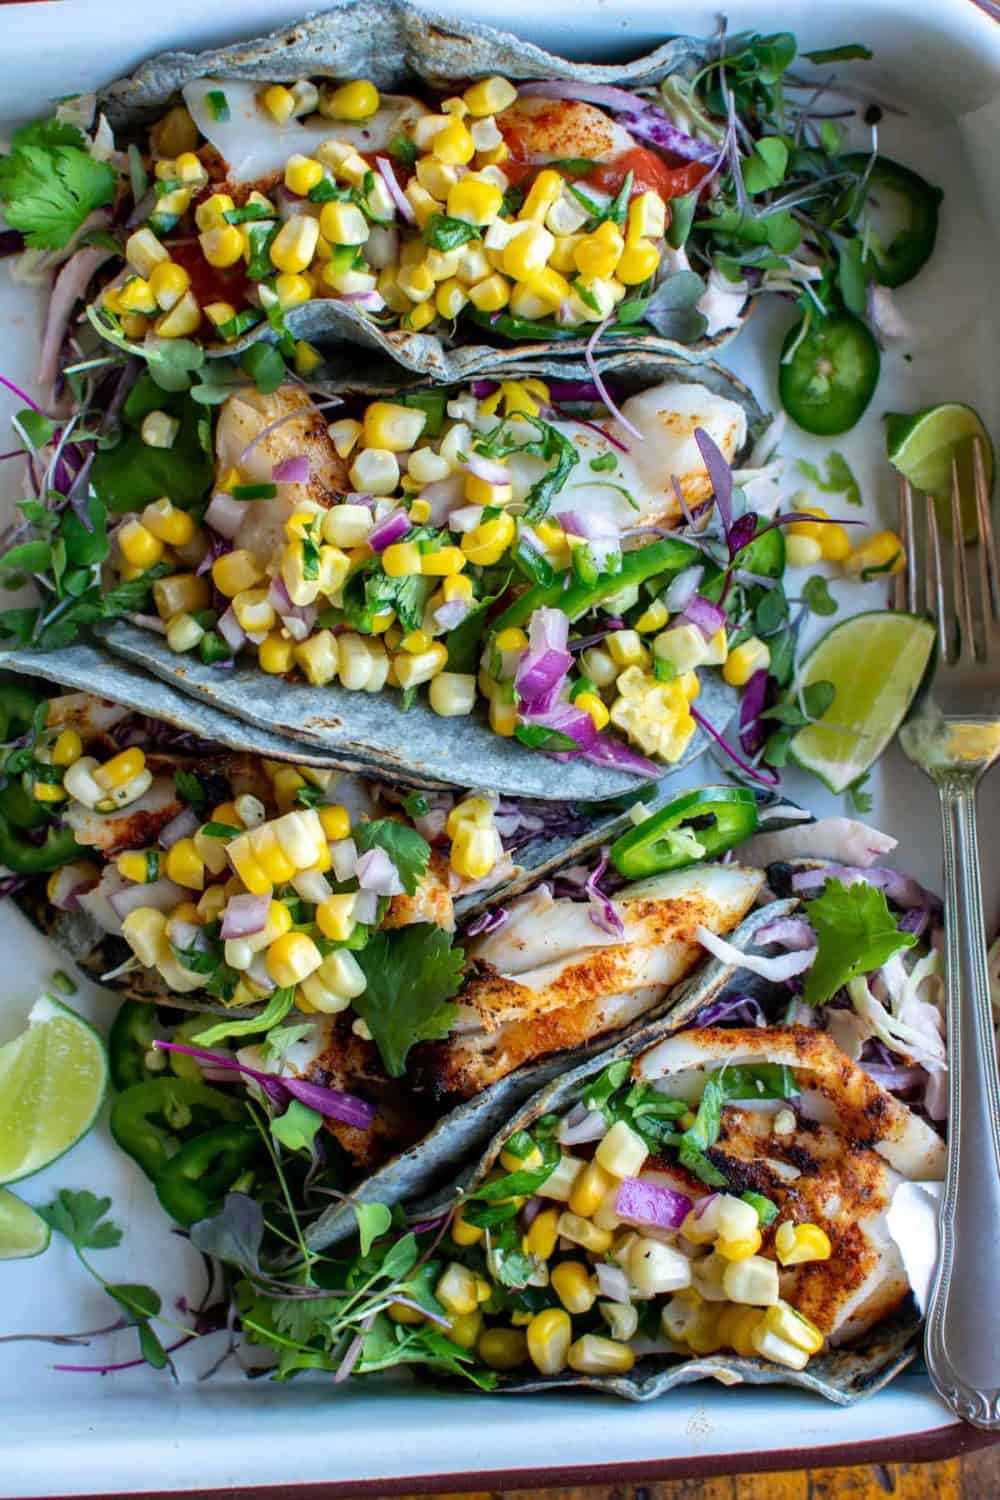 Grilled Fish Tacos with Sweet Corn Salsa from Hola Jalapeno